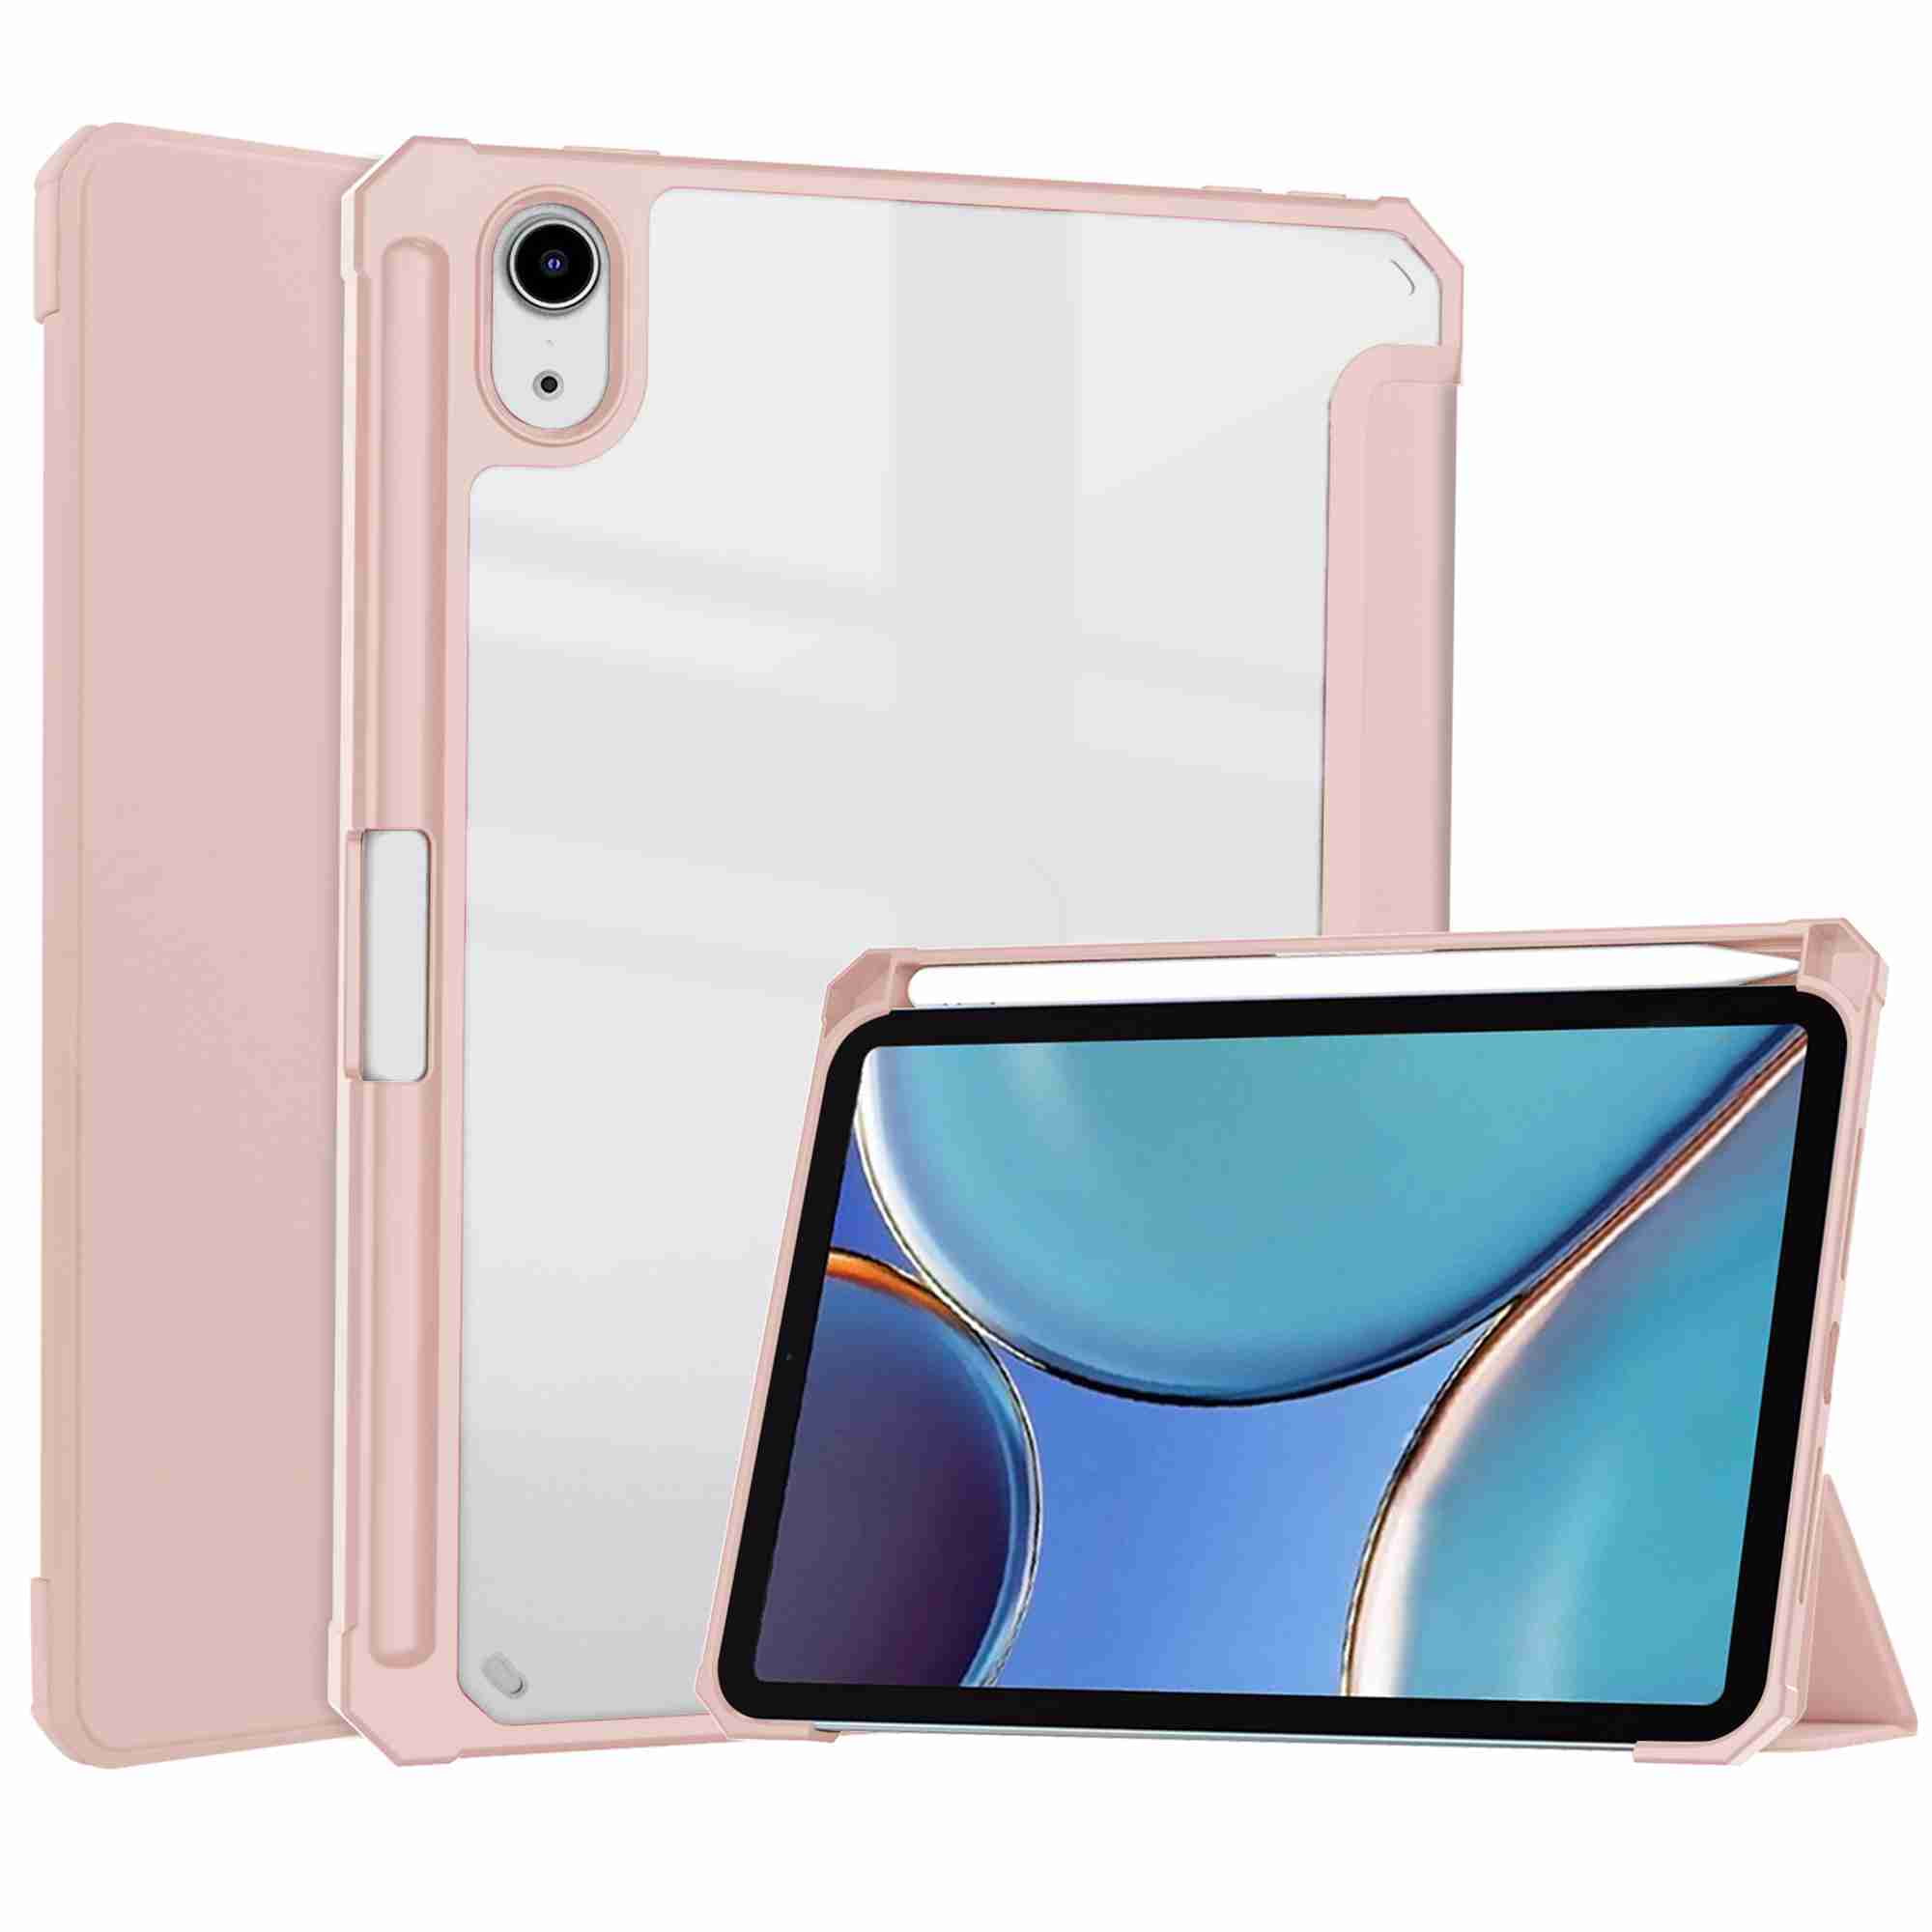 Hard PC Smart Cover Case for iPad Mini 6th Generation Delidigi iPad Mini 6 Case 2021 Supports Apple Pencil 2nd Charging Boho Slim iPad 8.3 Inch Case Cover with Trifold Stand Auto Sleep/Wake